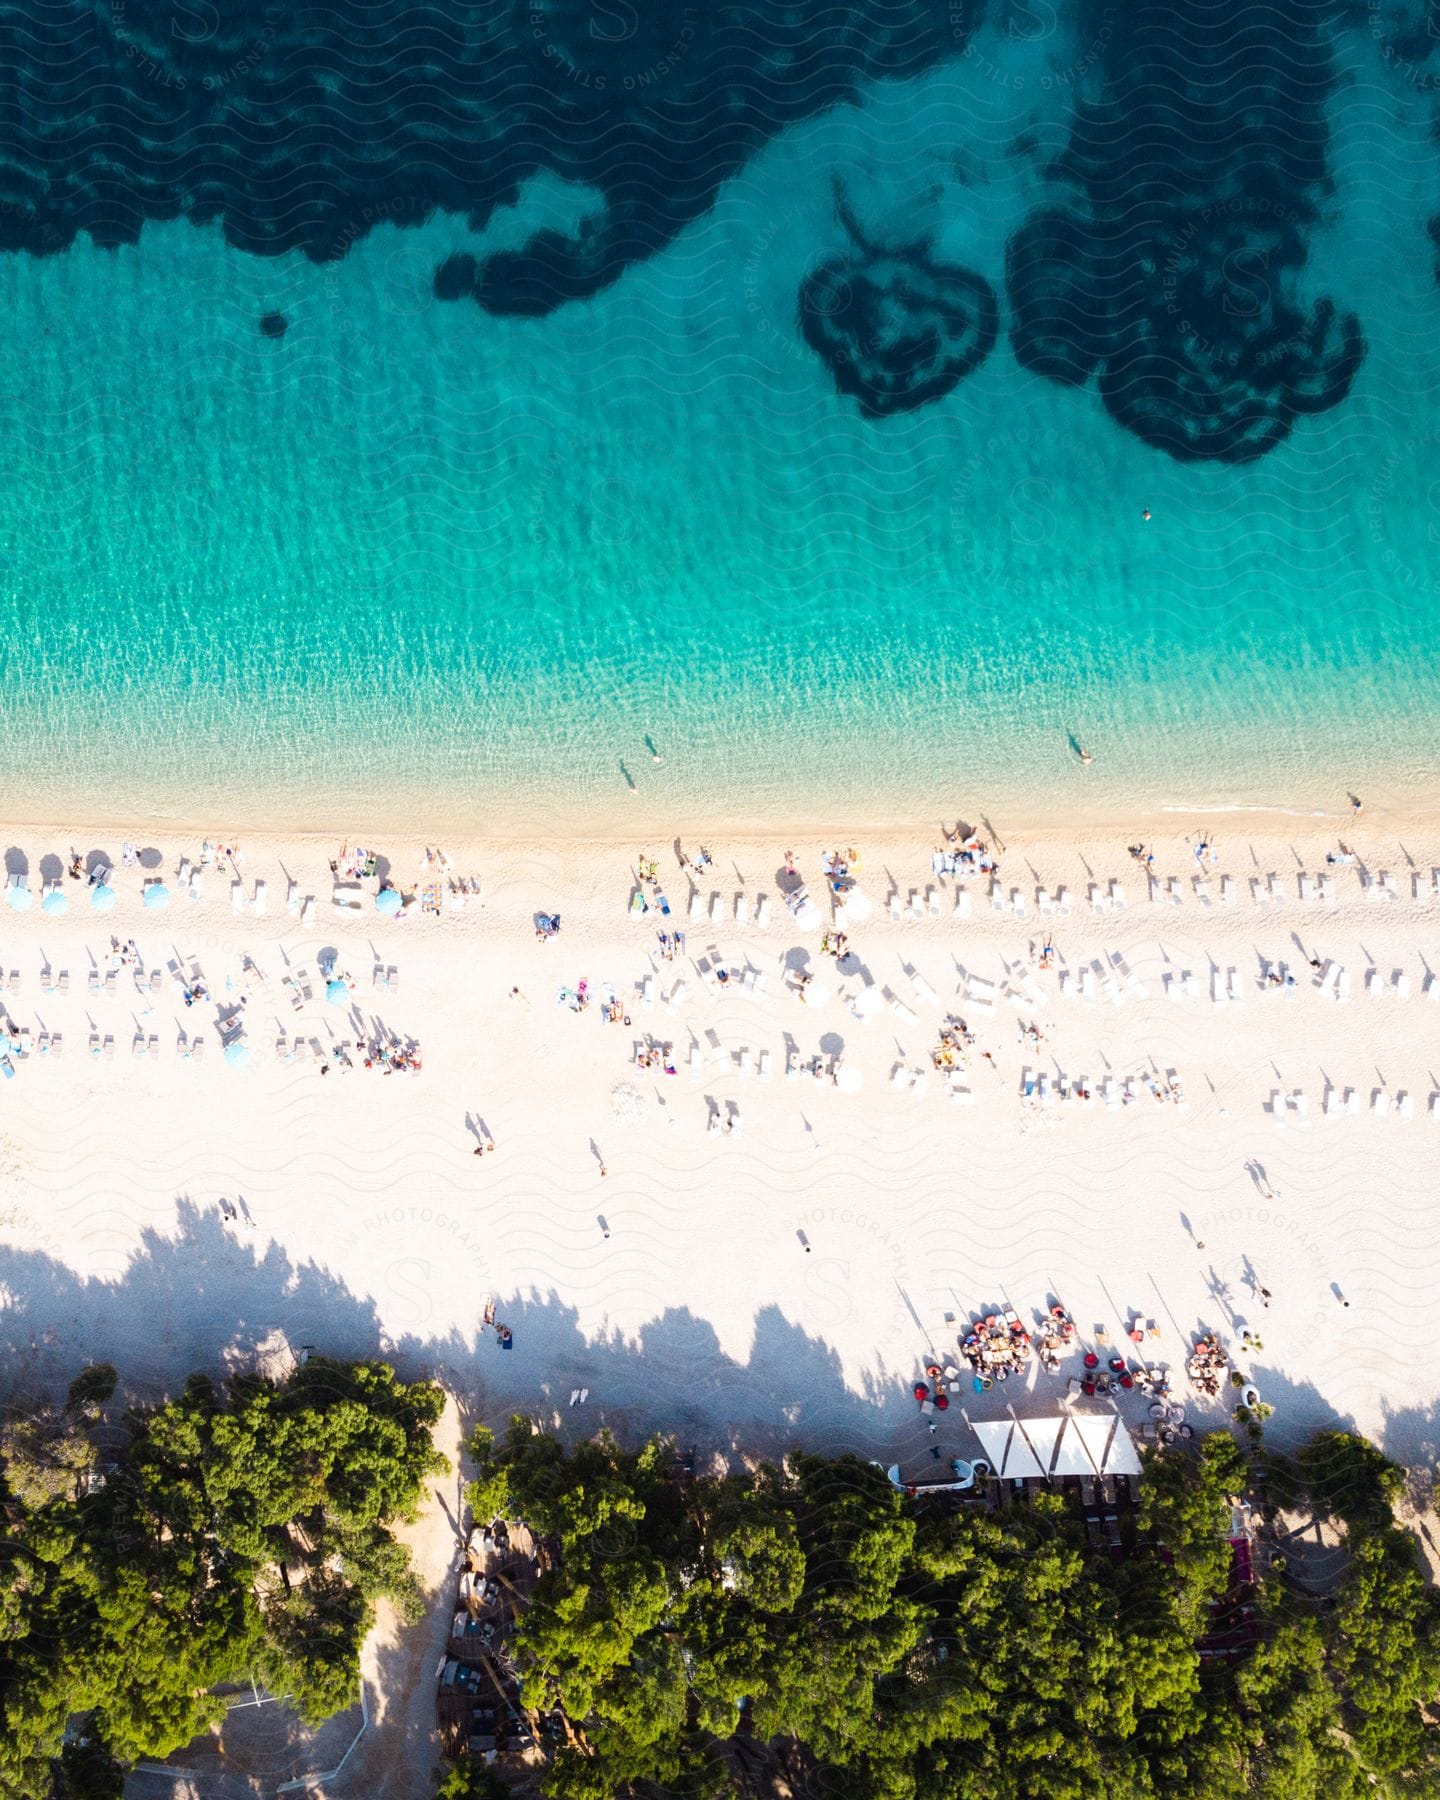 Looking down at many people on a beach between the clear blue water and trees